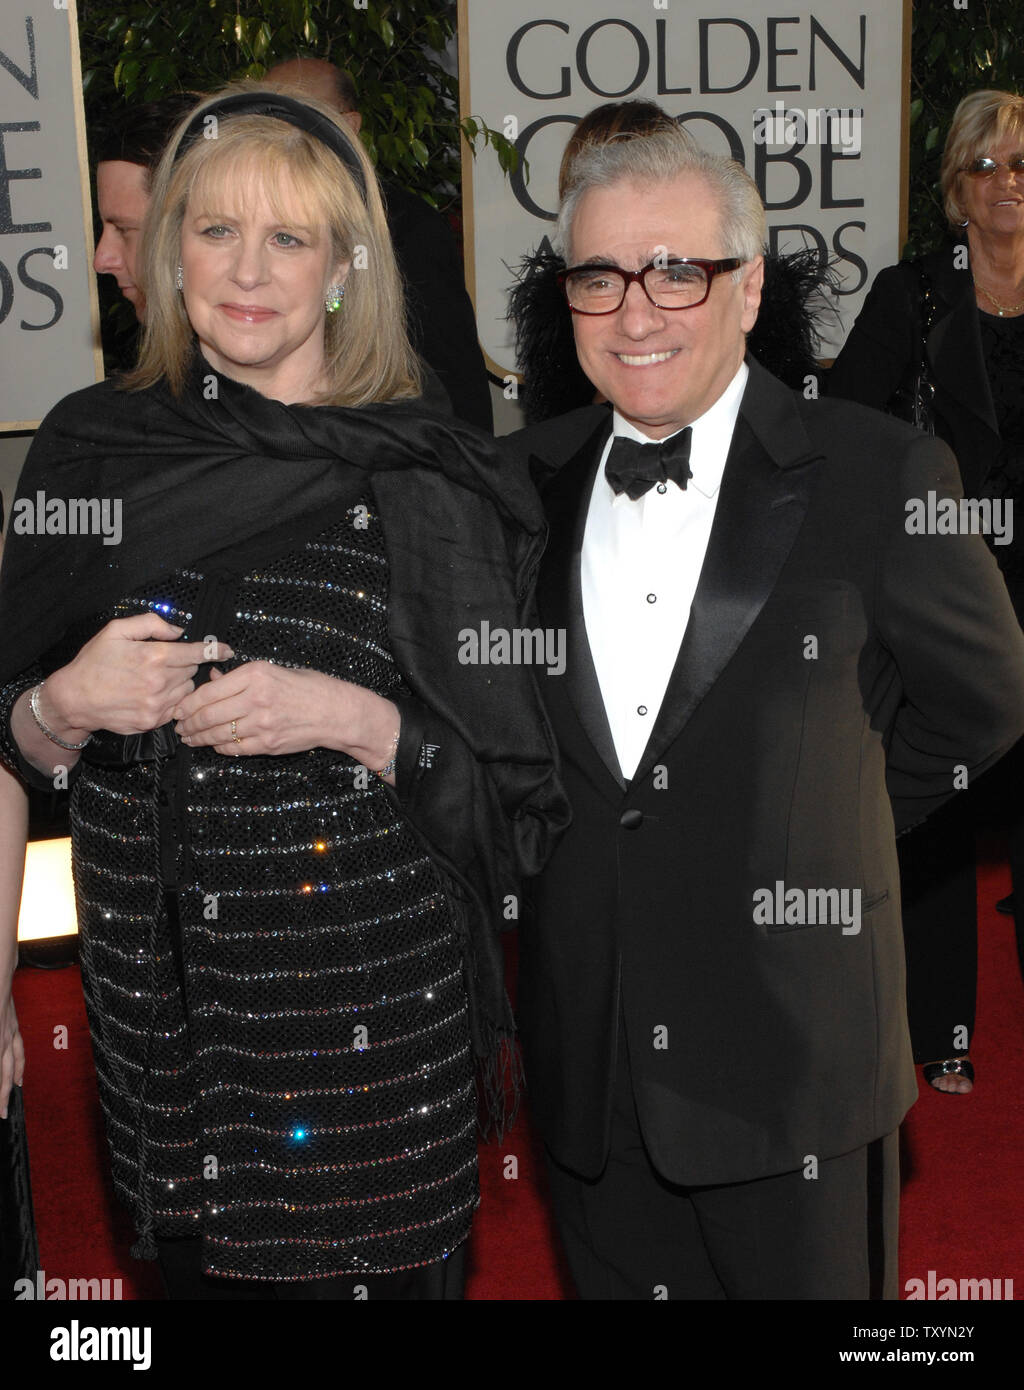 Martin Scorsese (R) and wife Helen Morris arrive at the 64th annual Golden Globe Awards in Beverly Hills, California on January 15, 2007.  (UPI Photo/Jim Ruymen) Stock Photo